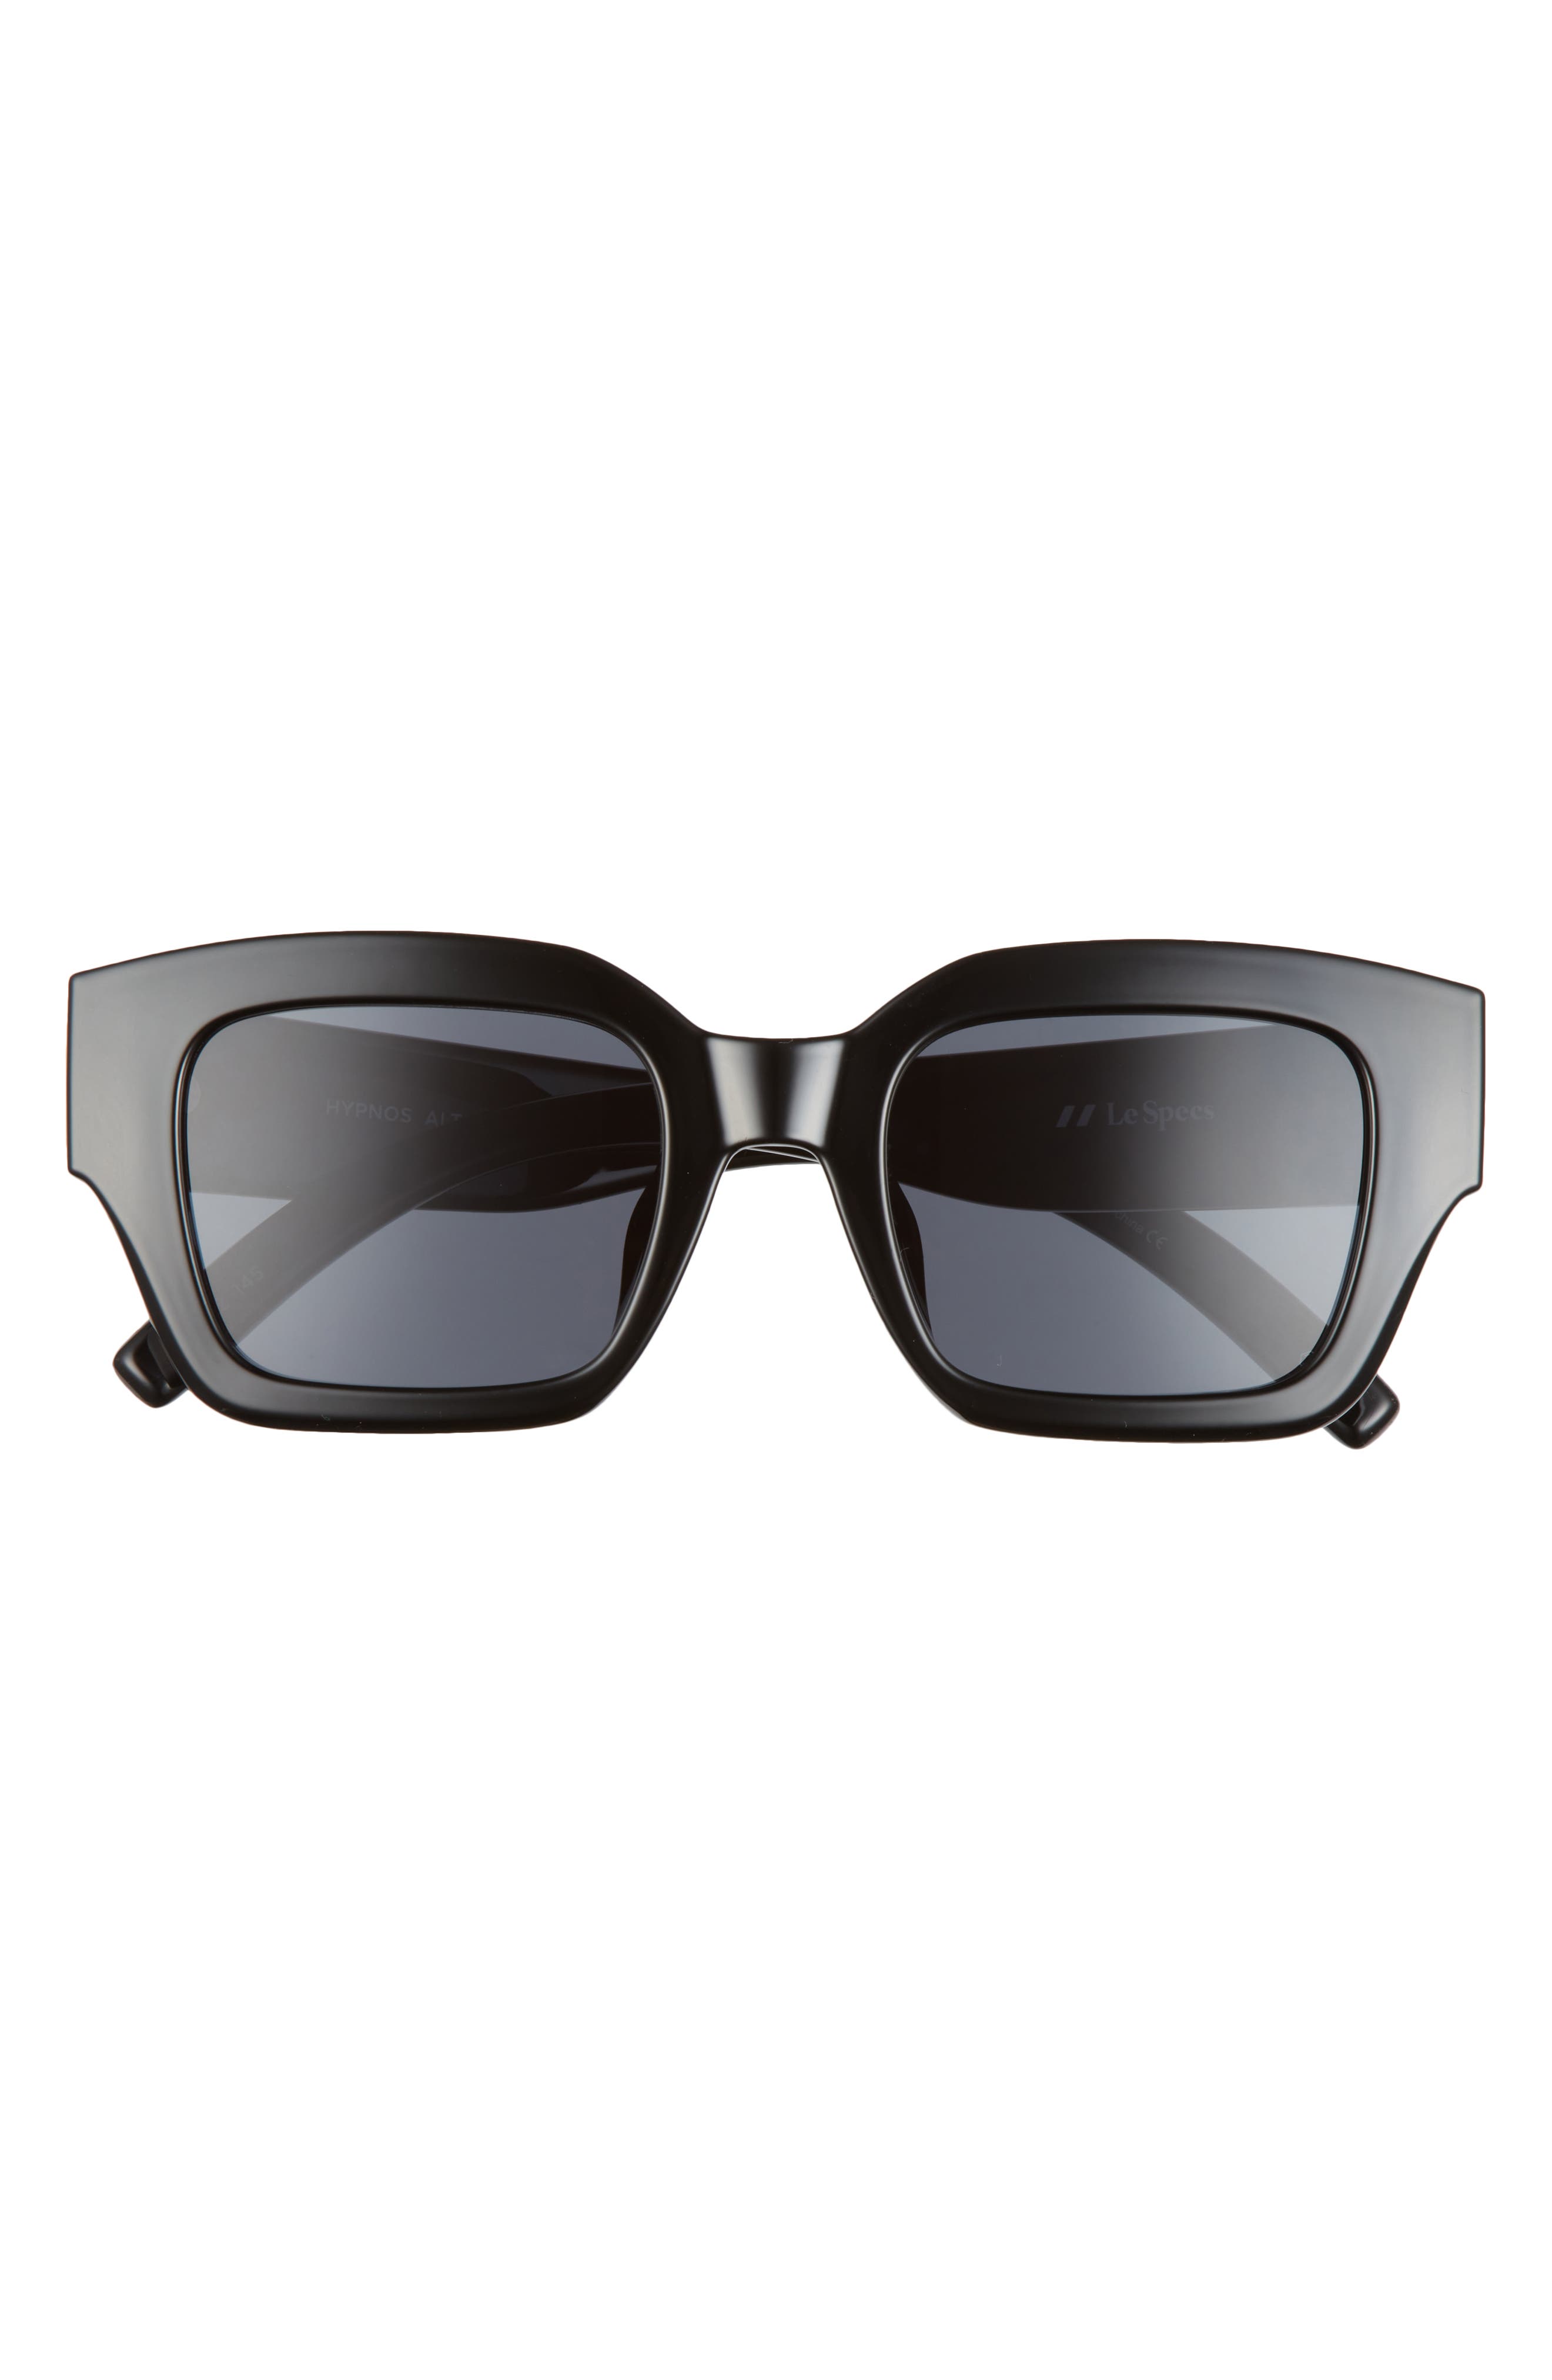 Le Specs Hypnos Alt Fit 50mm Square Sunglasses in Black /Smoke Mono at Nordstrom